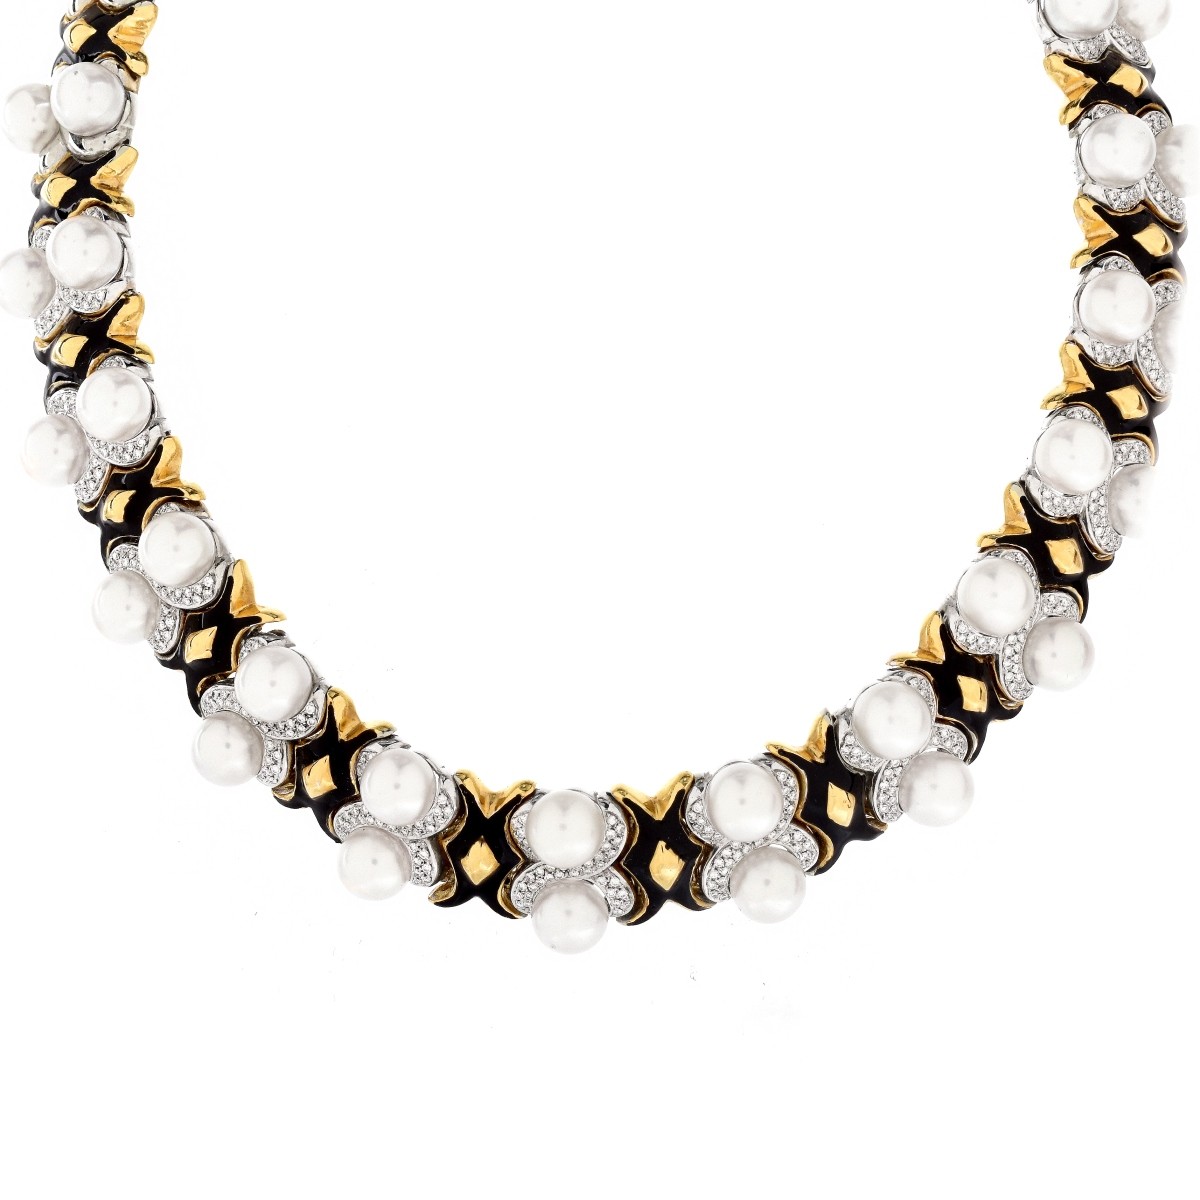 Diamond, Pearl, Enamel and 18K Necklace